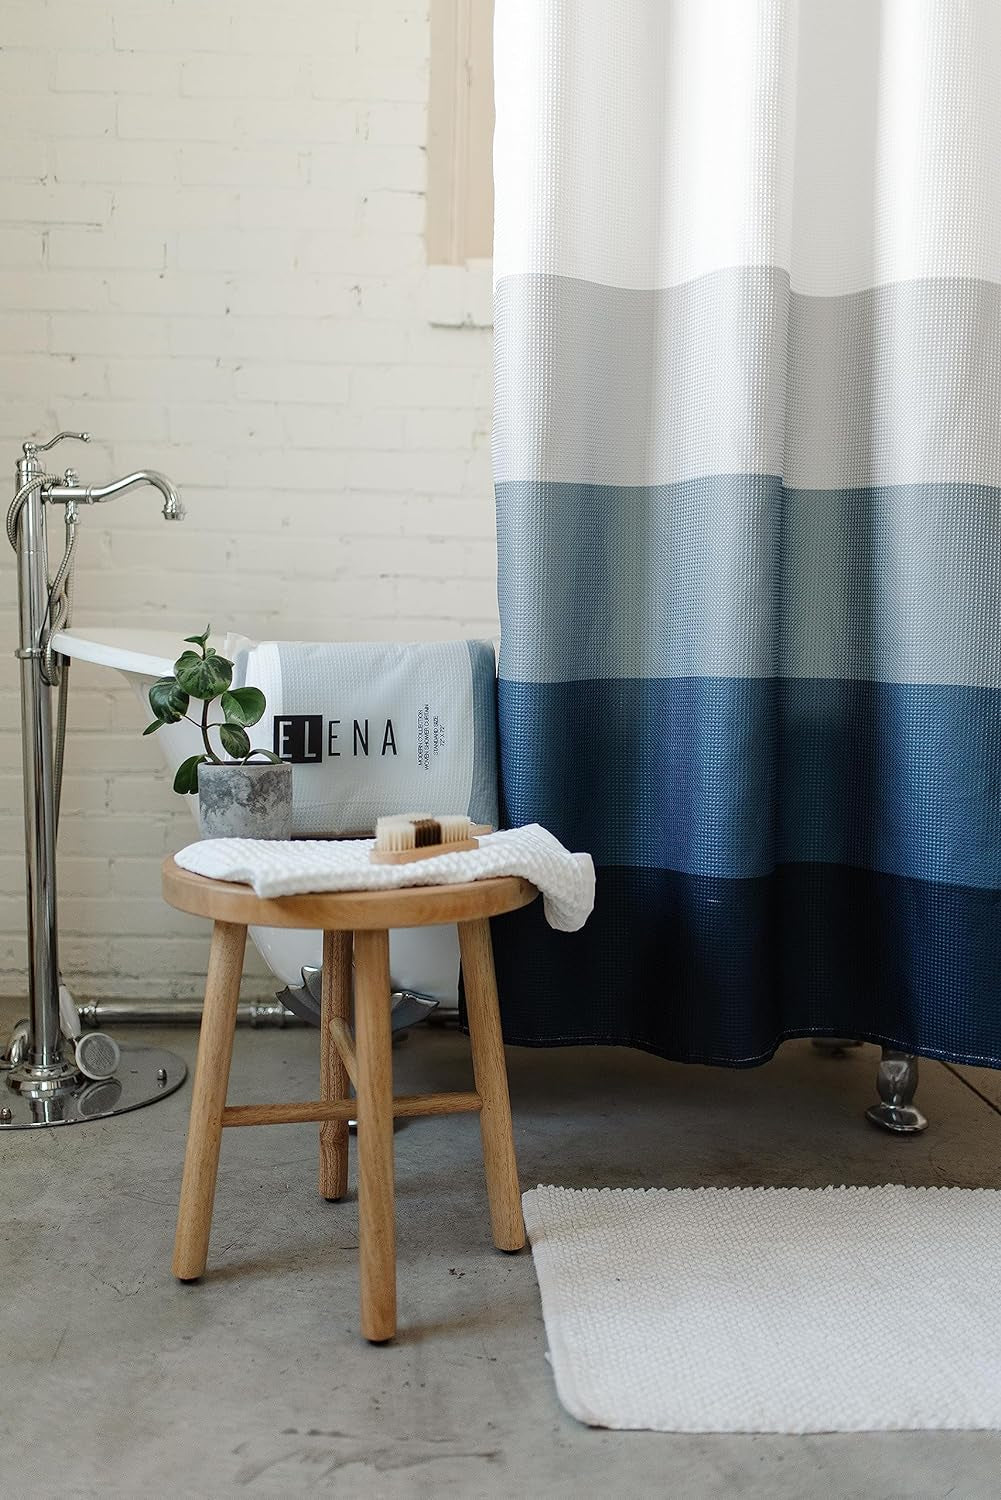 Fabric Shower Curtains for Bathroom | Luxury 230 GSM Polyester | 72X72 Inch Standard Size | Modern Blue Durable Woven Waffle Fabric with Blue Stripe Design